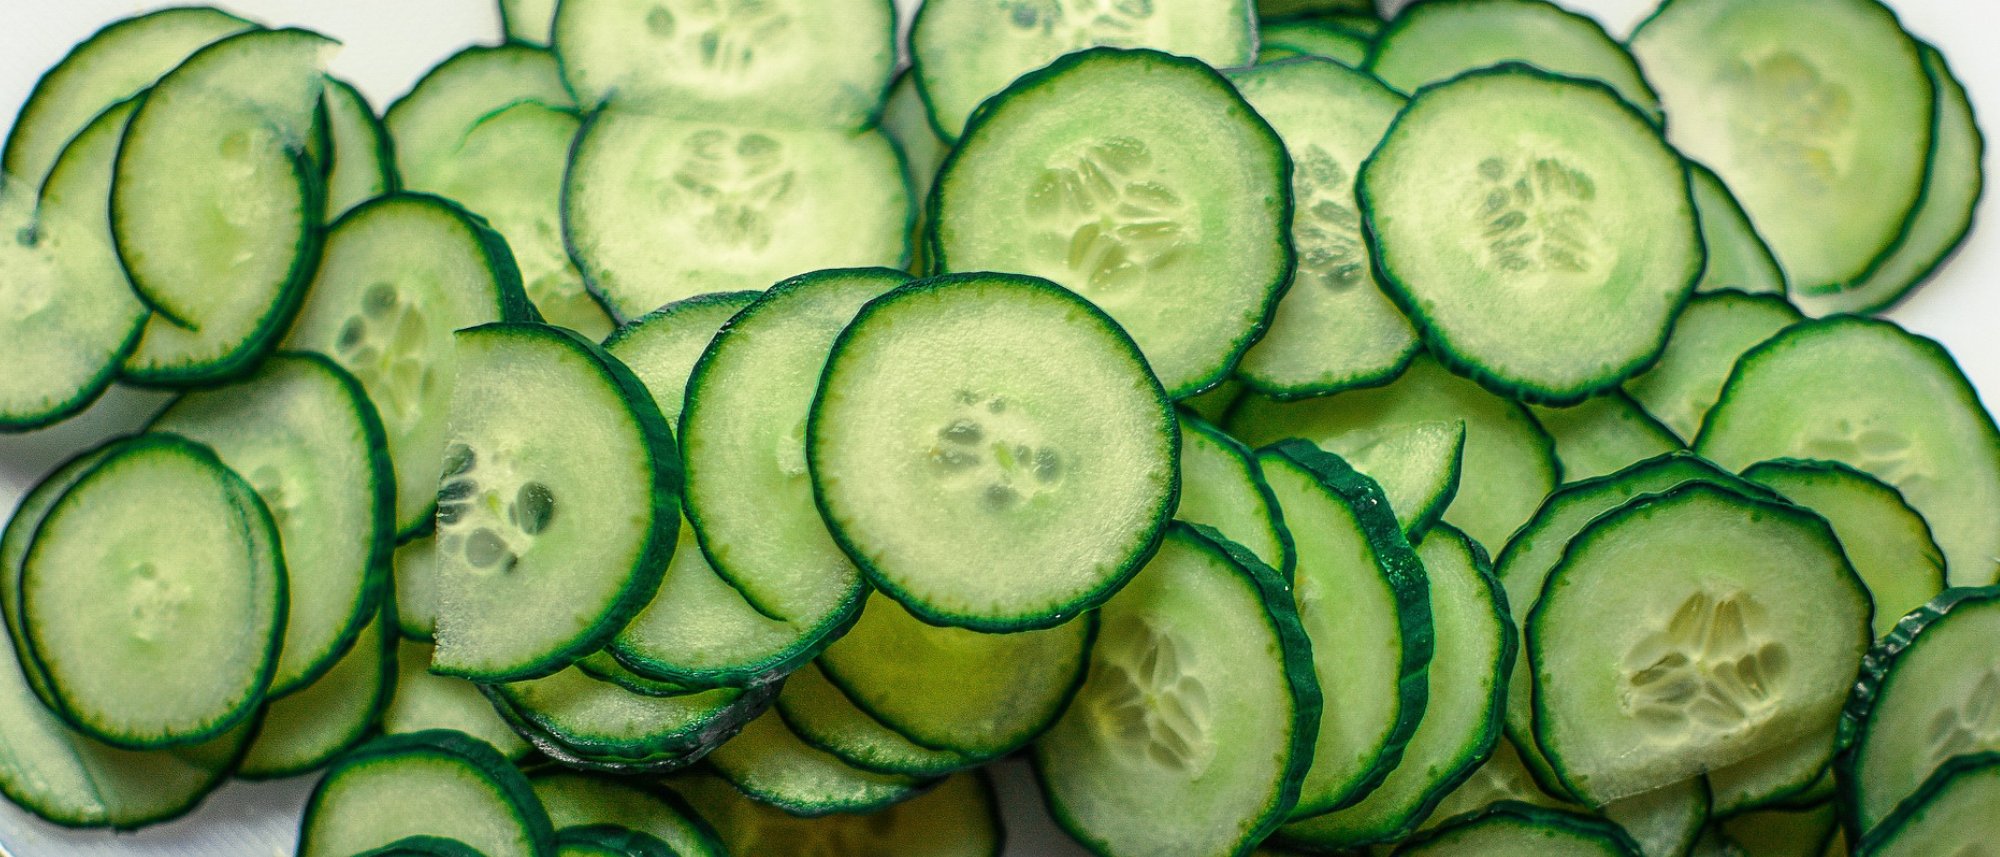 Grow crunchy cucumbers for a garden snack or for pickling